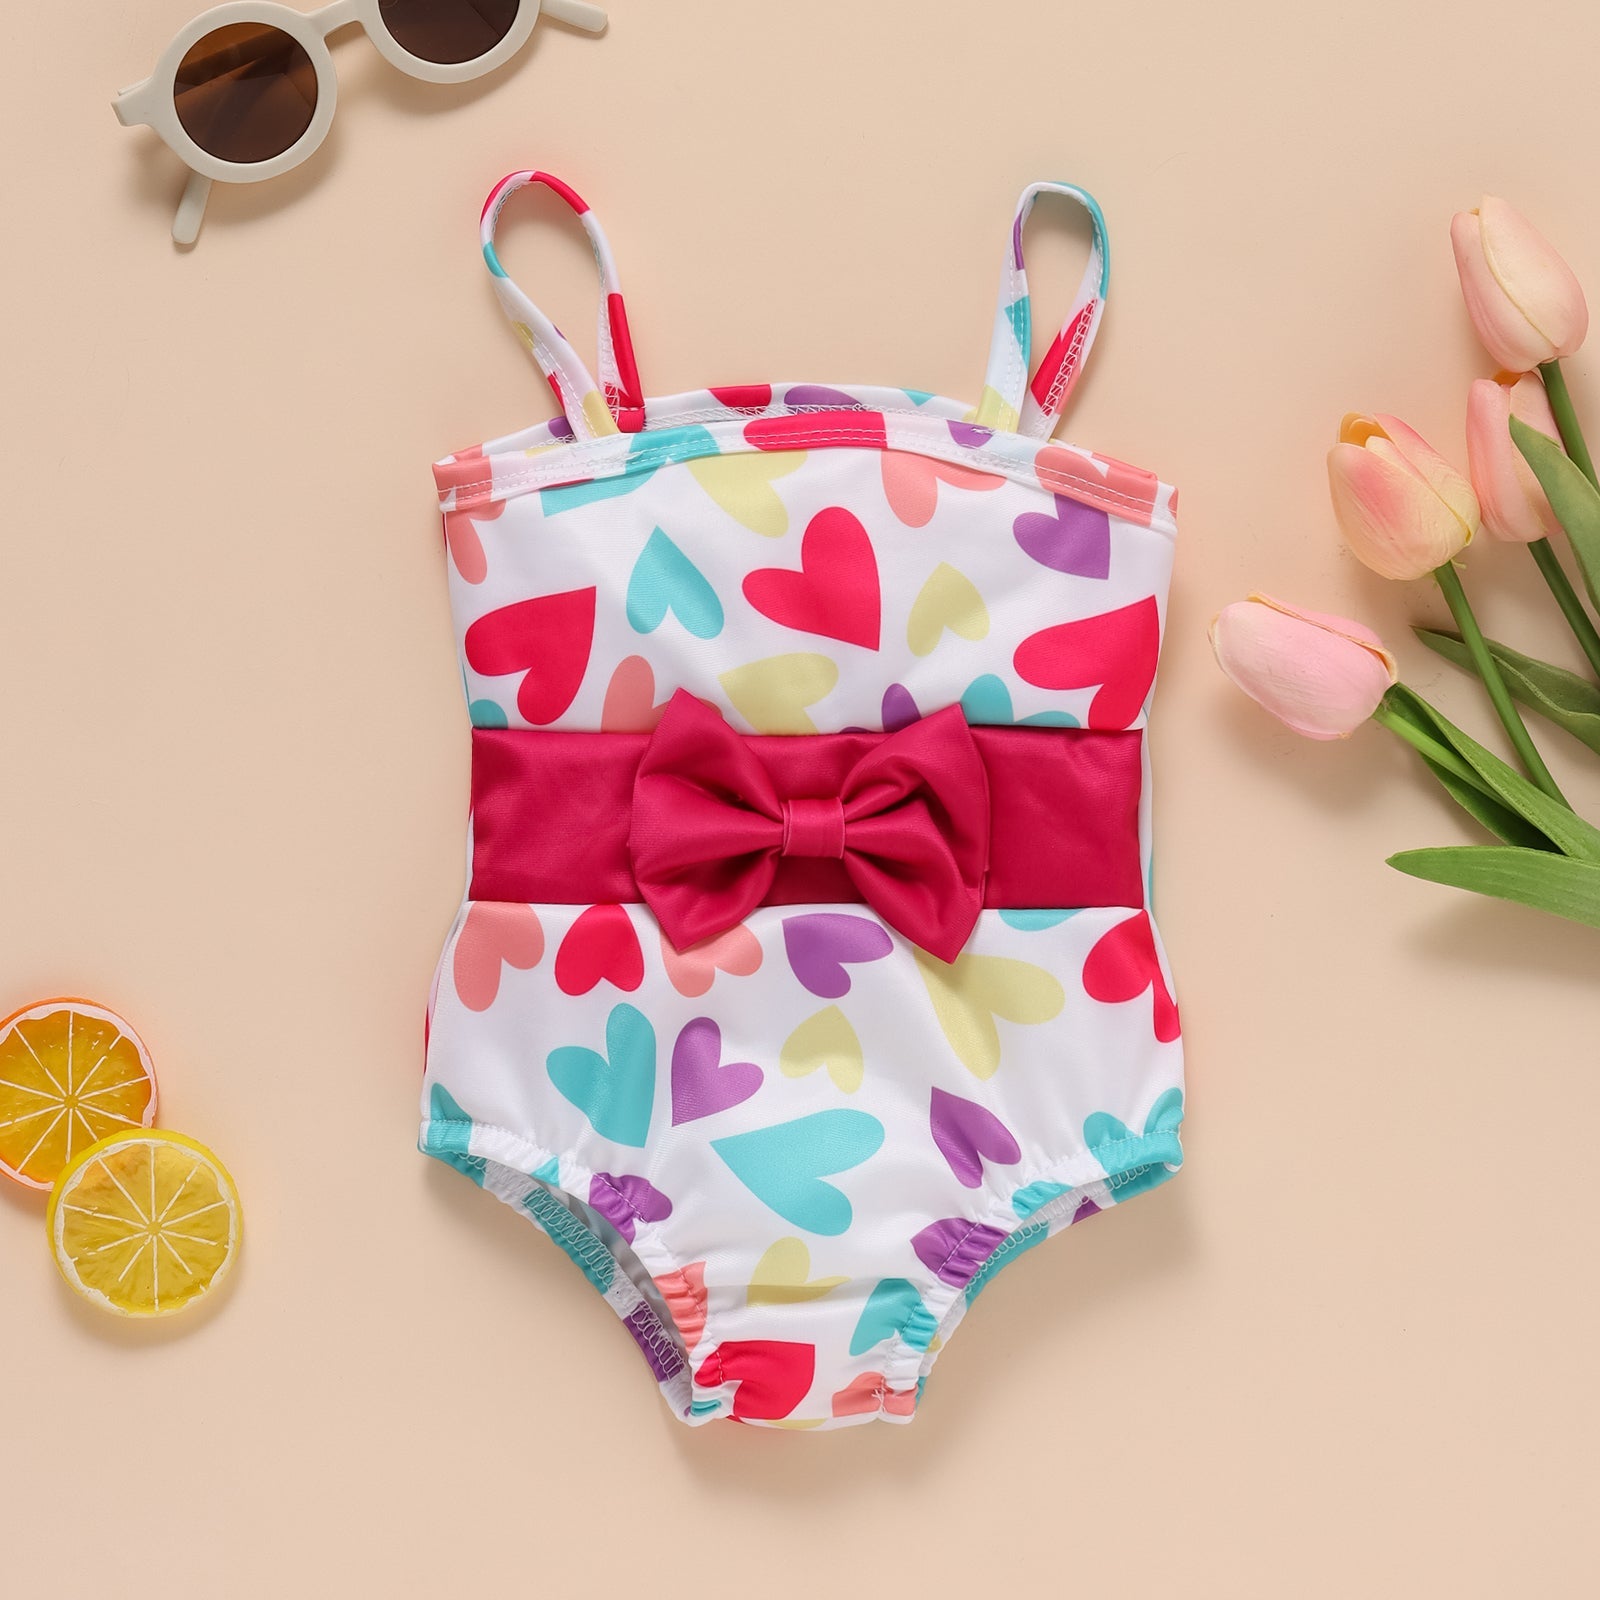 Heart Printed Swimsuit.